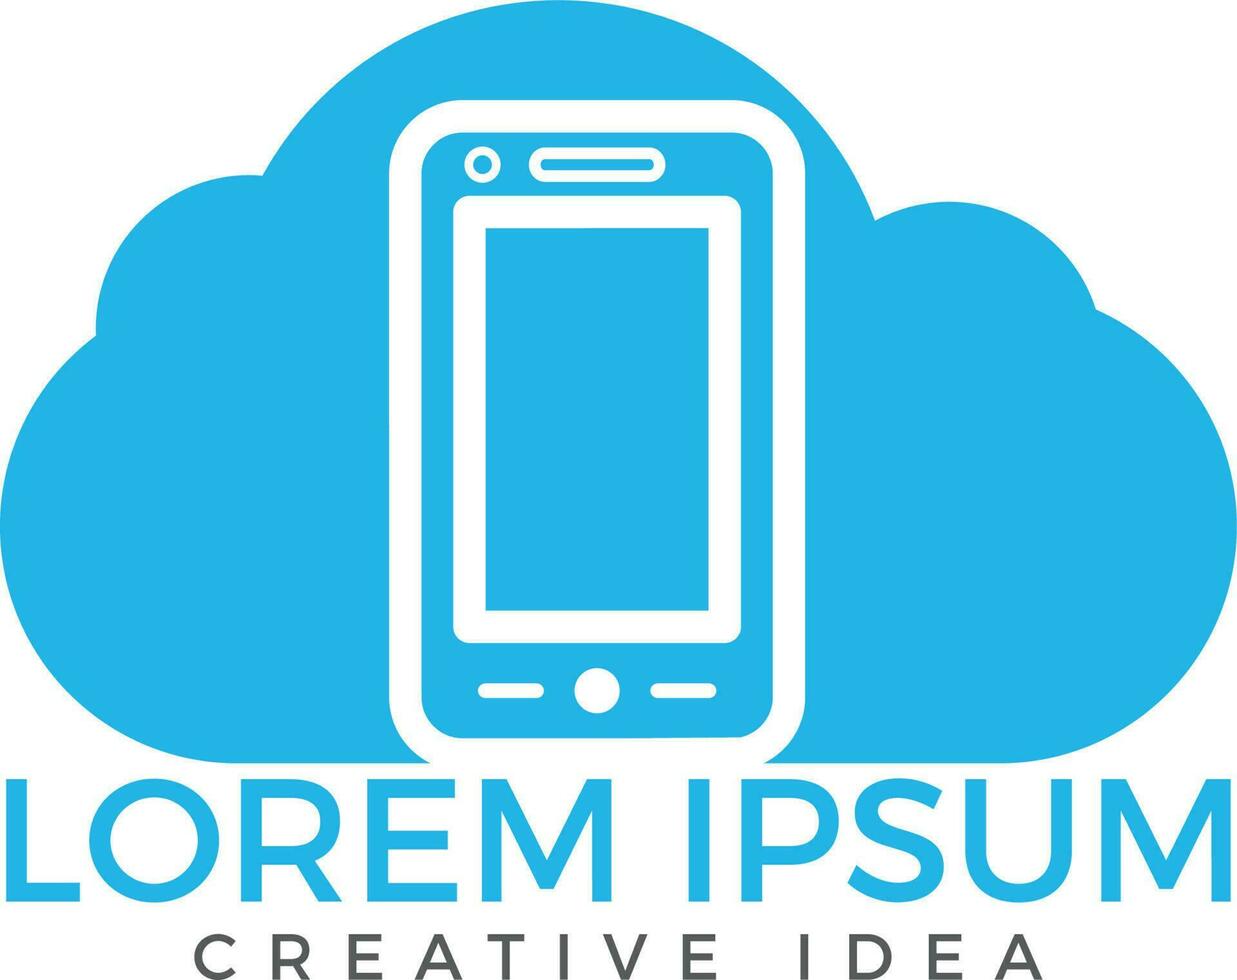 Cloud and Mobile phone logo design. Digital storage and computing service concept. vector